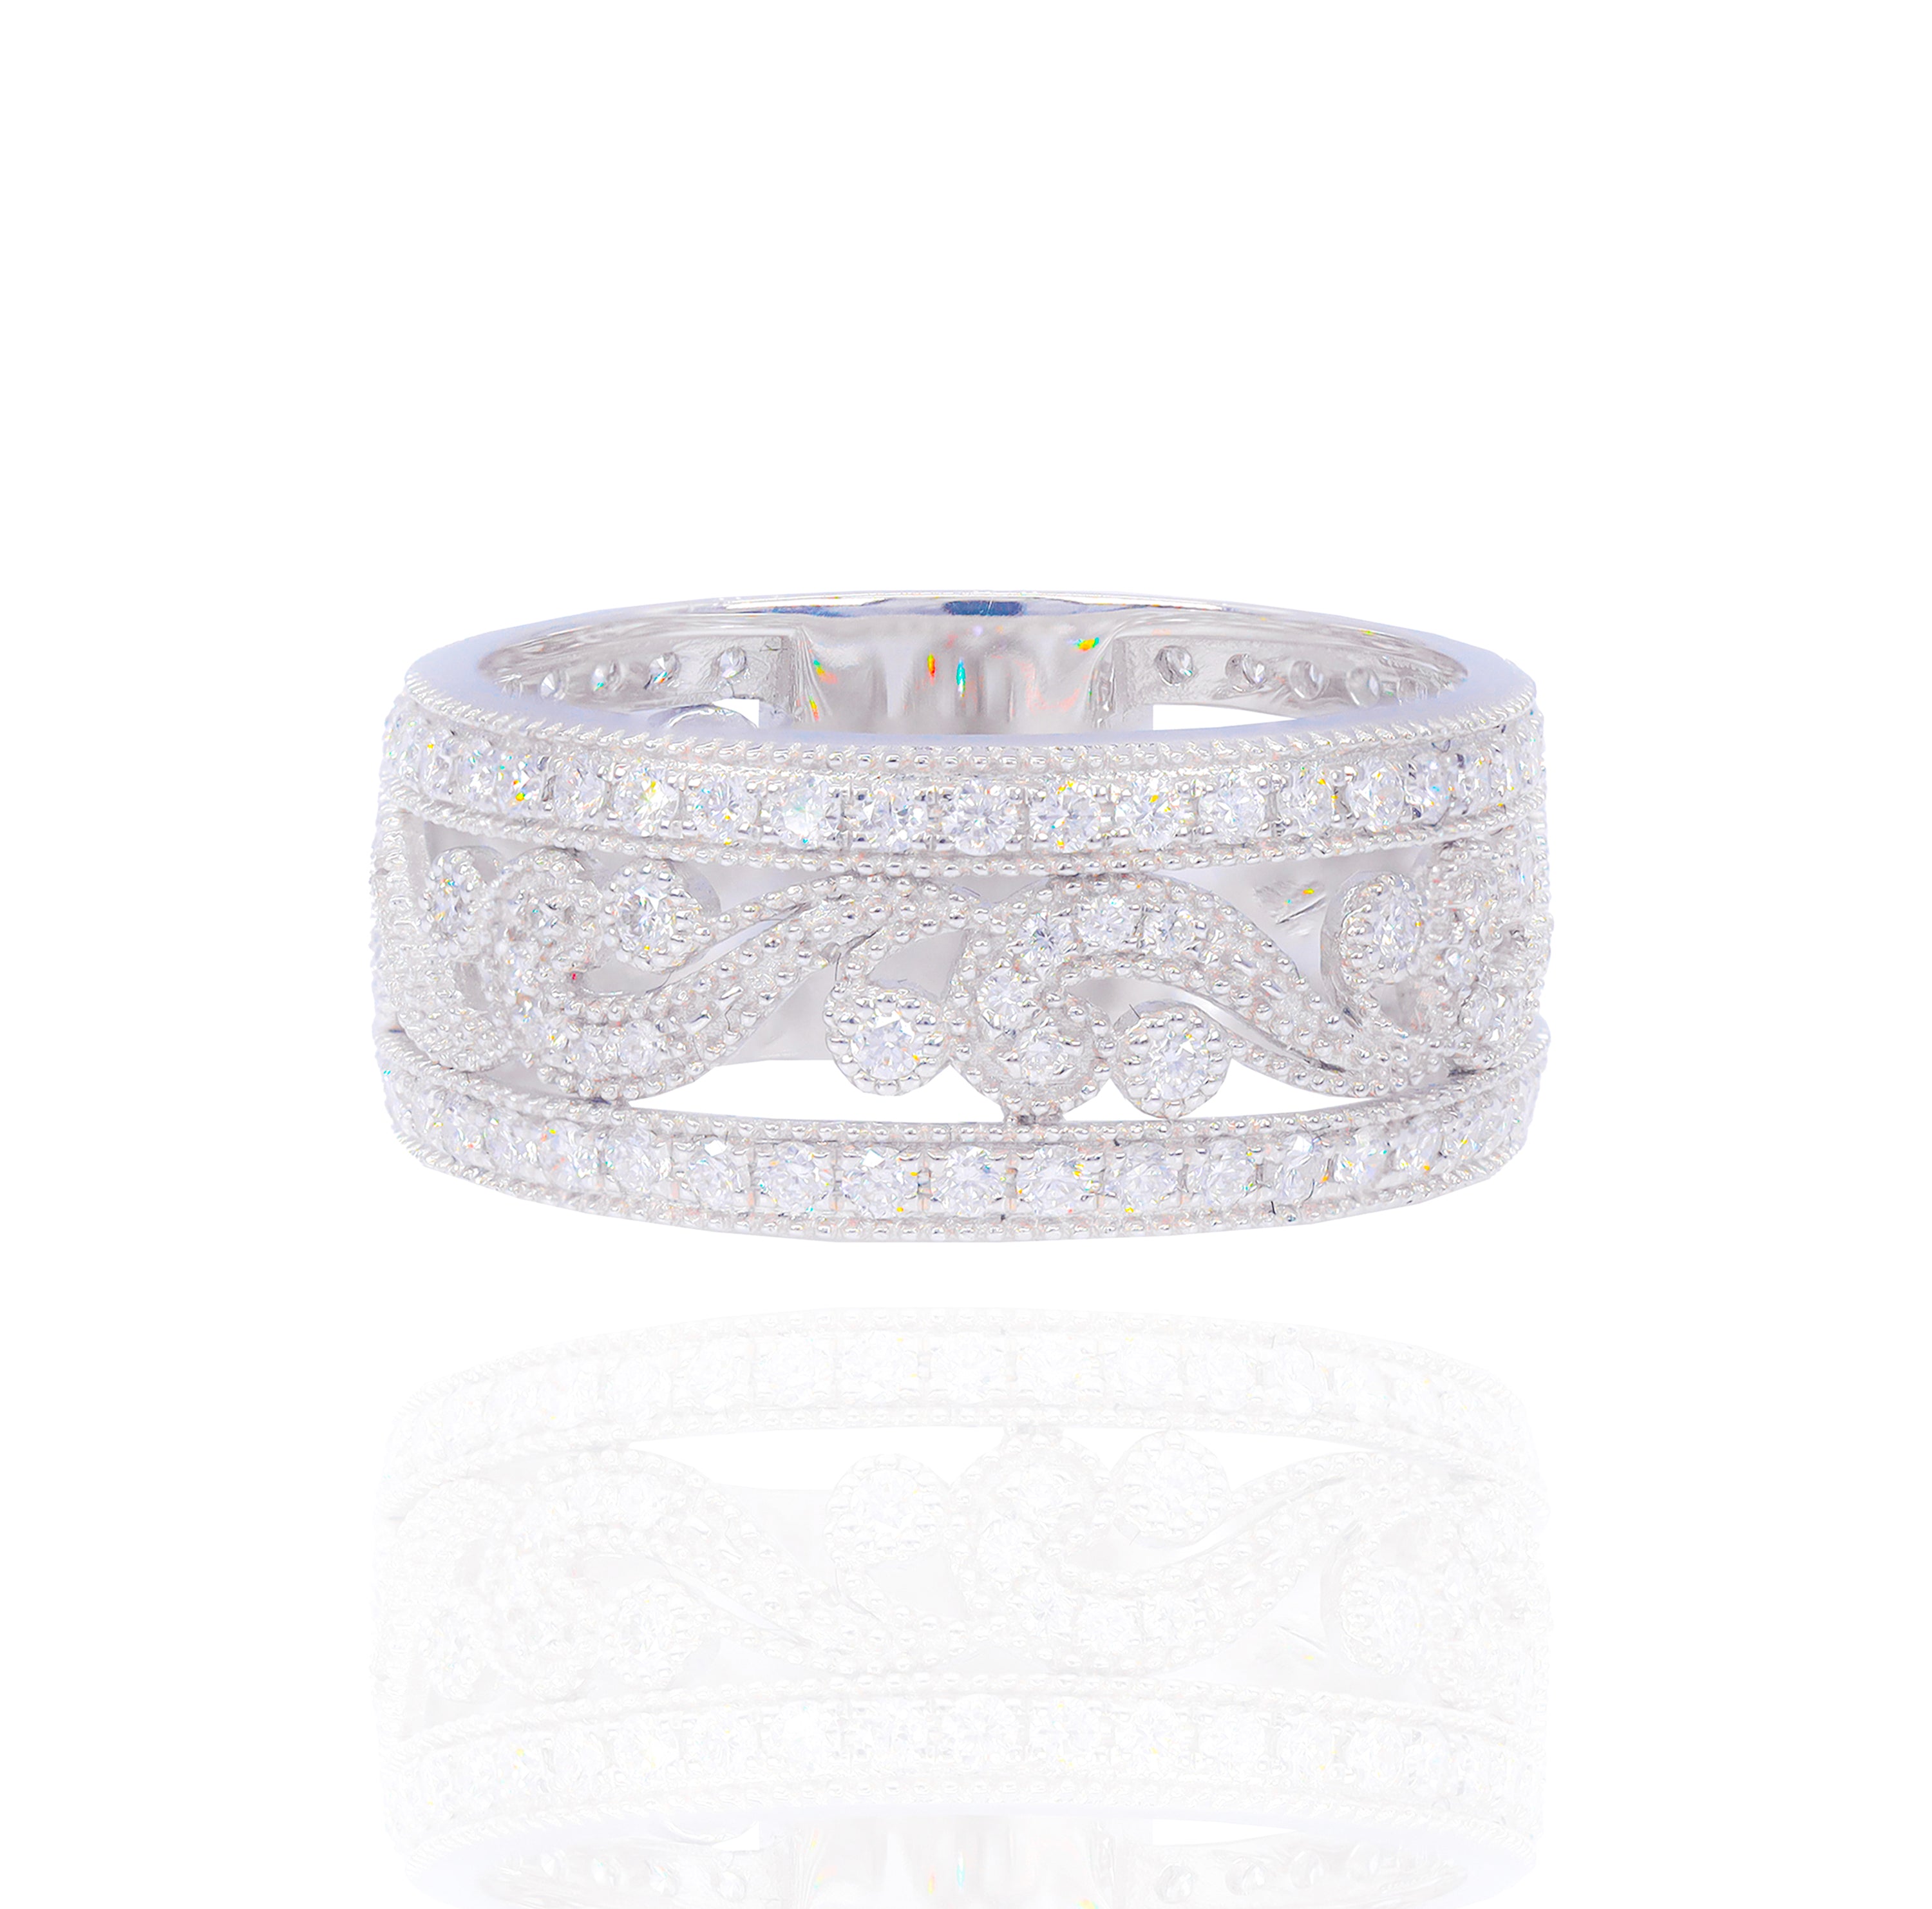 Floral Diamond Ring Band with Ornaments